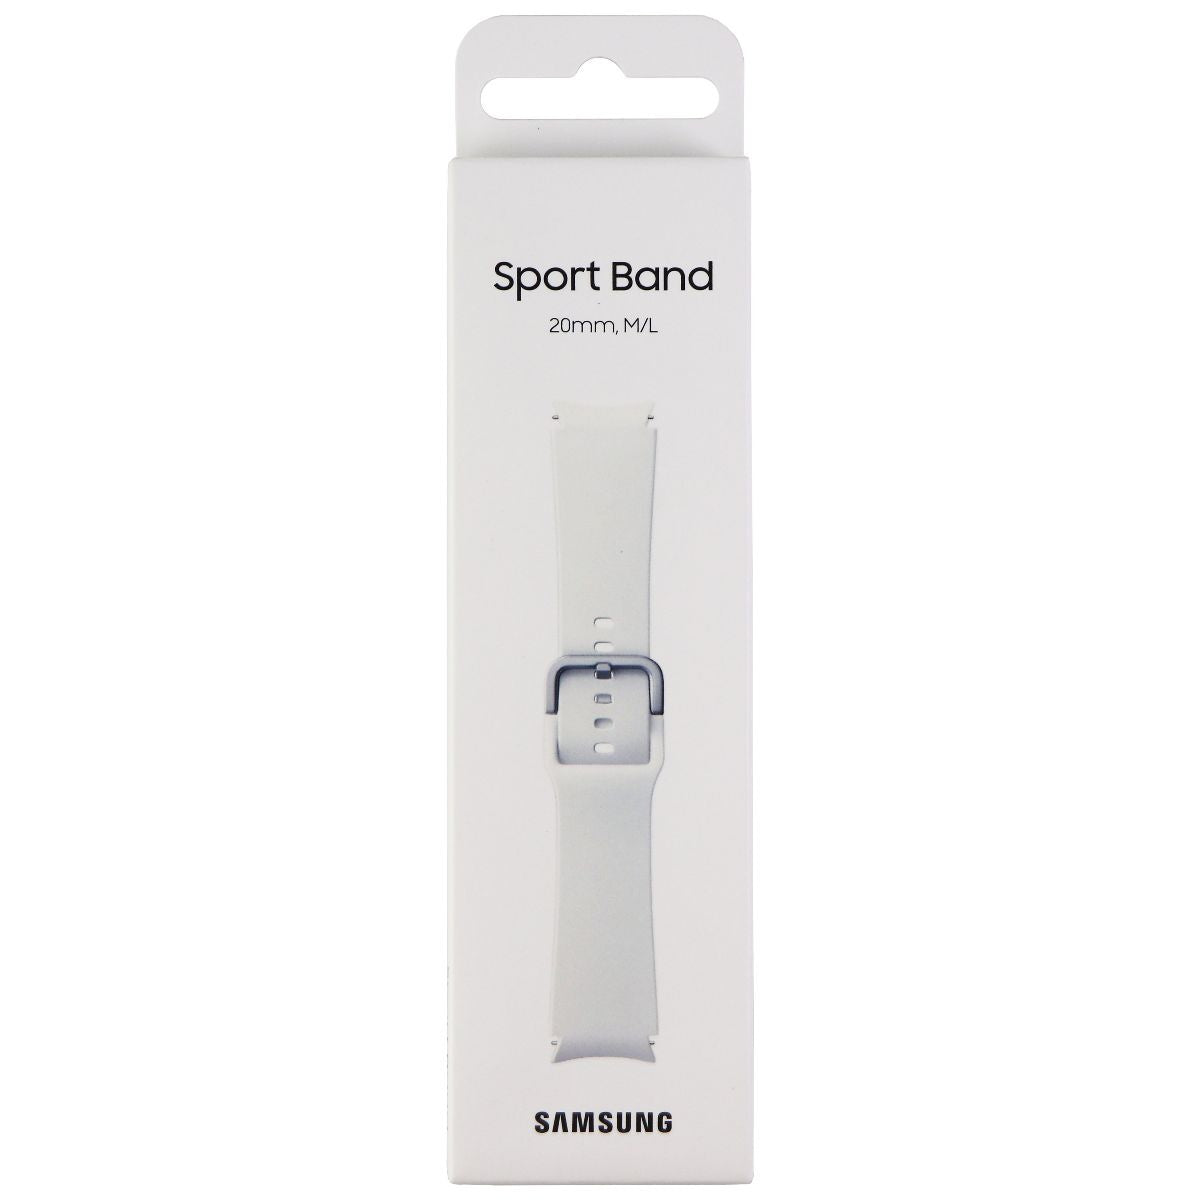 Samsung Sport Band for Galaxy Watch4 & Later - White (20mm) M/L Smart Watch Accessories - Watch Bands Samsung    - Simple Cell Bulk Wholesale Pricing - USA Seller